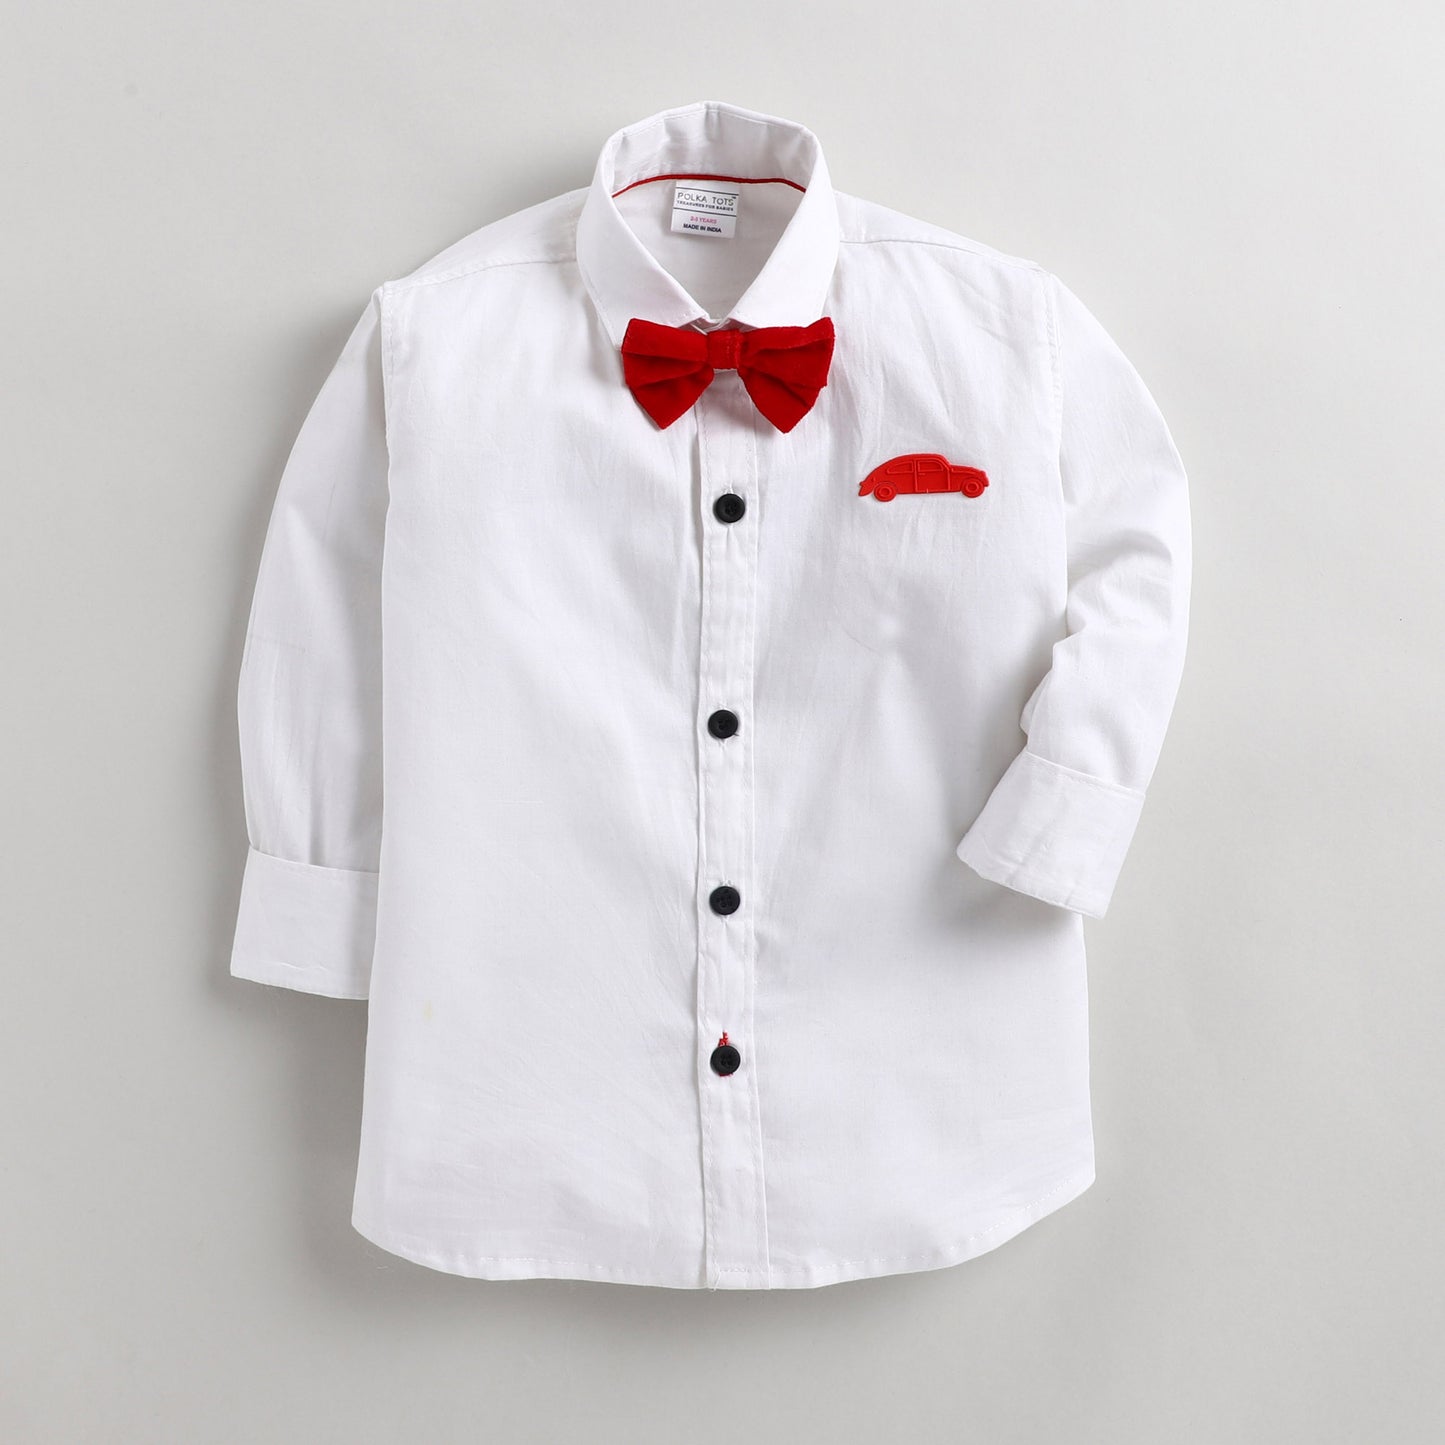 Polka Tots Full Sleeves Car Patch Detailing Shirt With Bow Tie - White